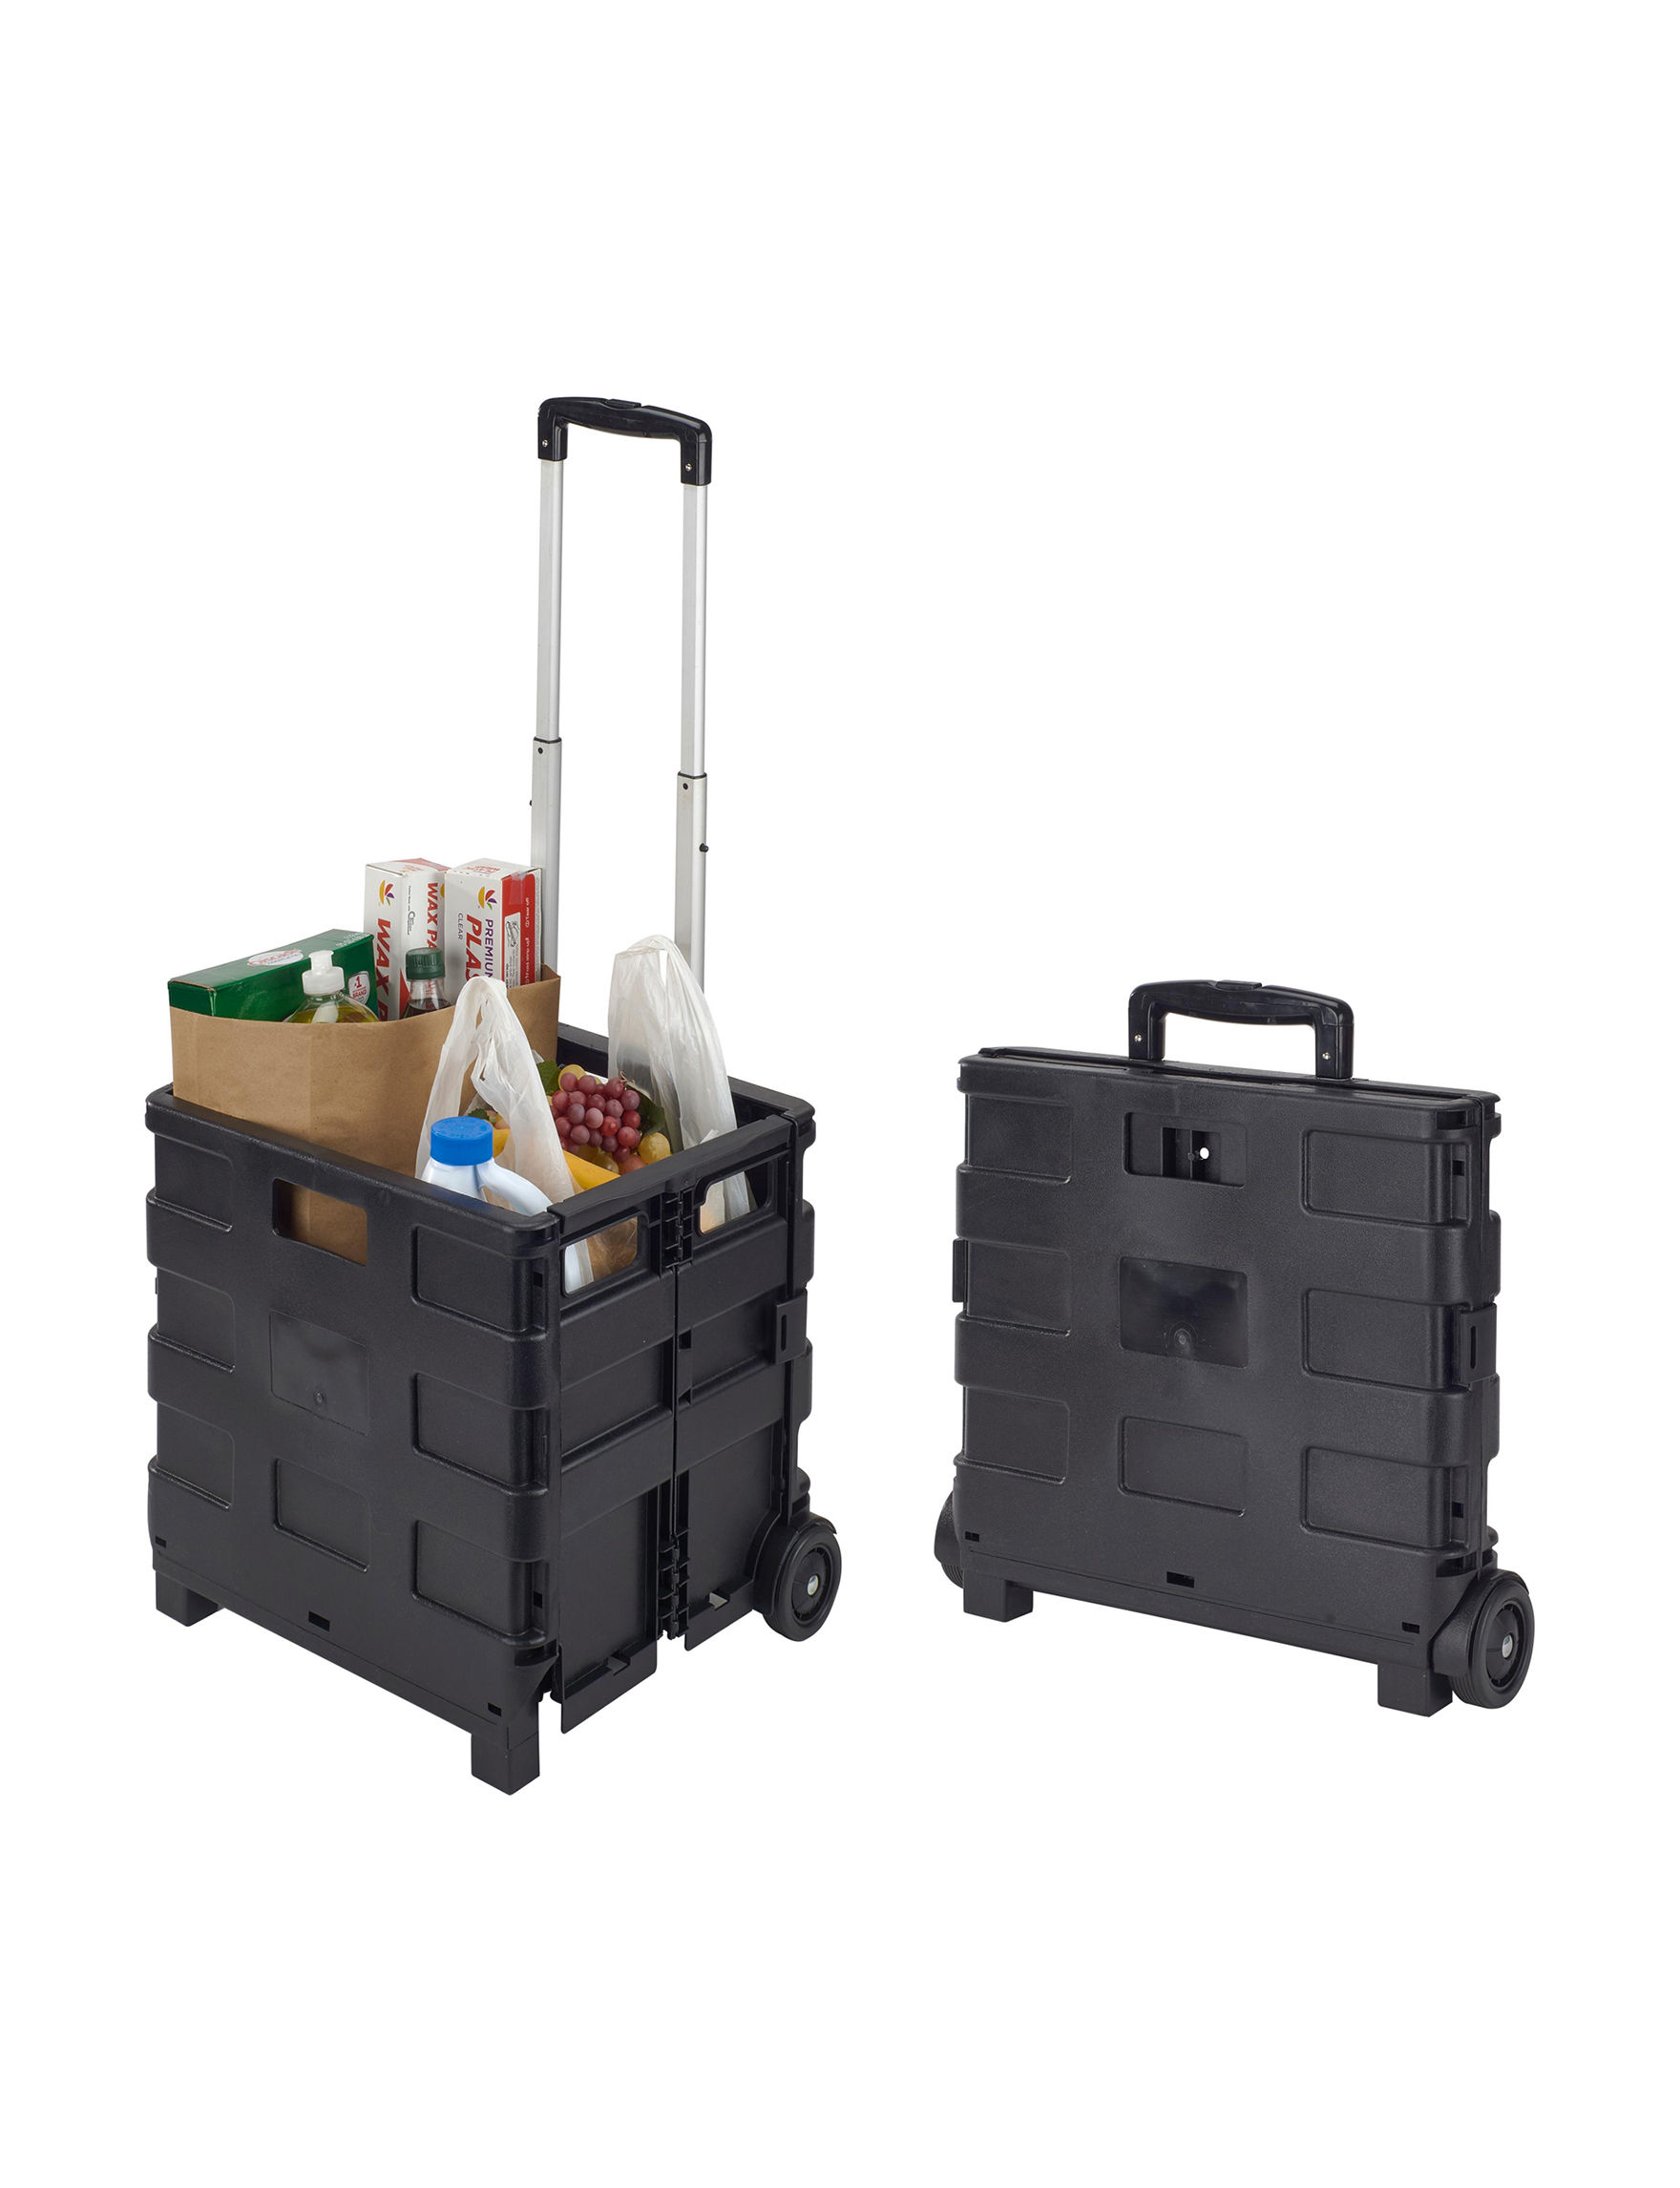 Simplify Tote and Go Collapsible Utility Cart